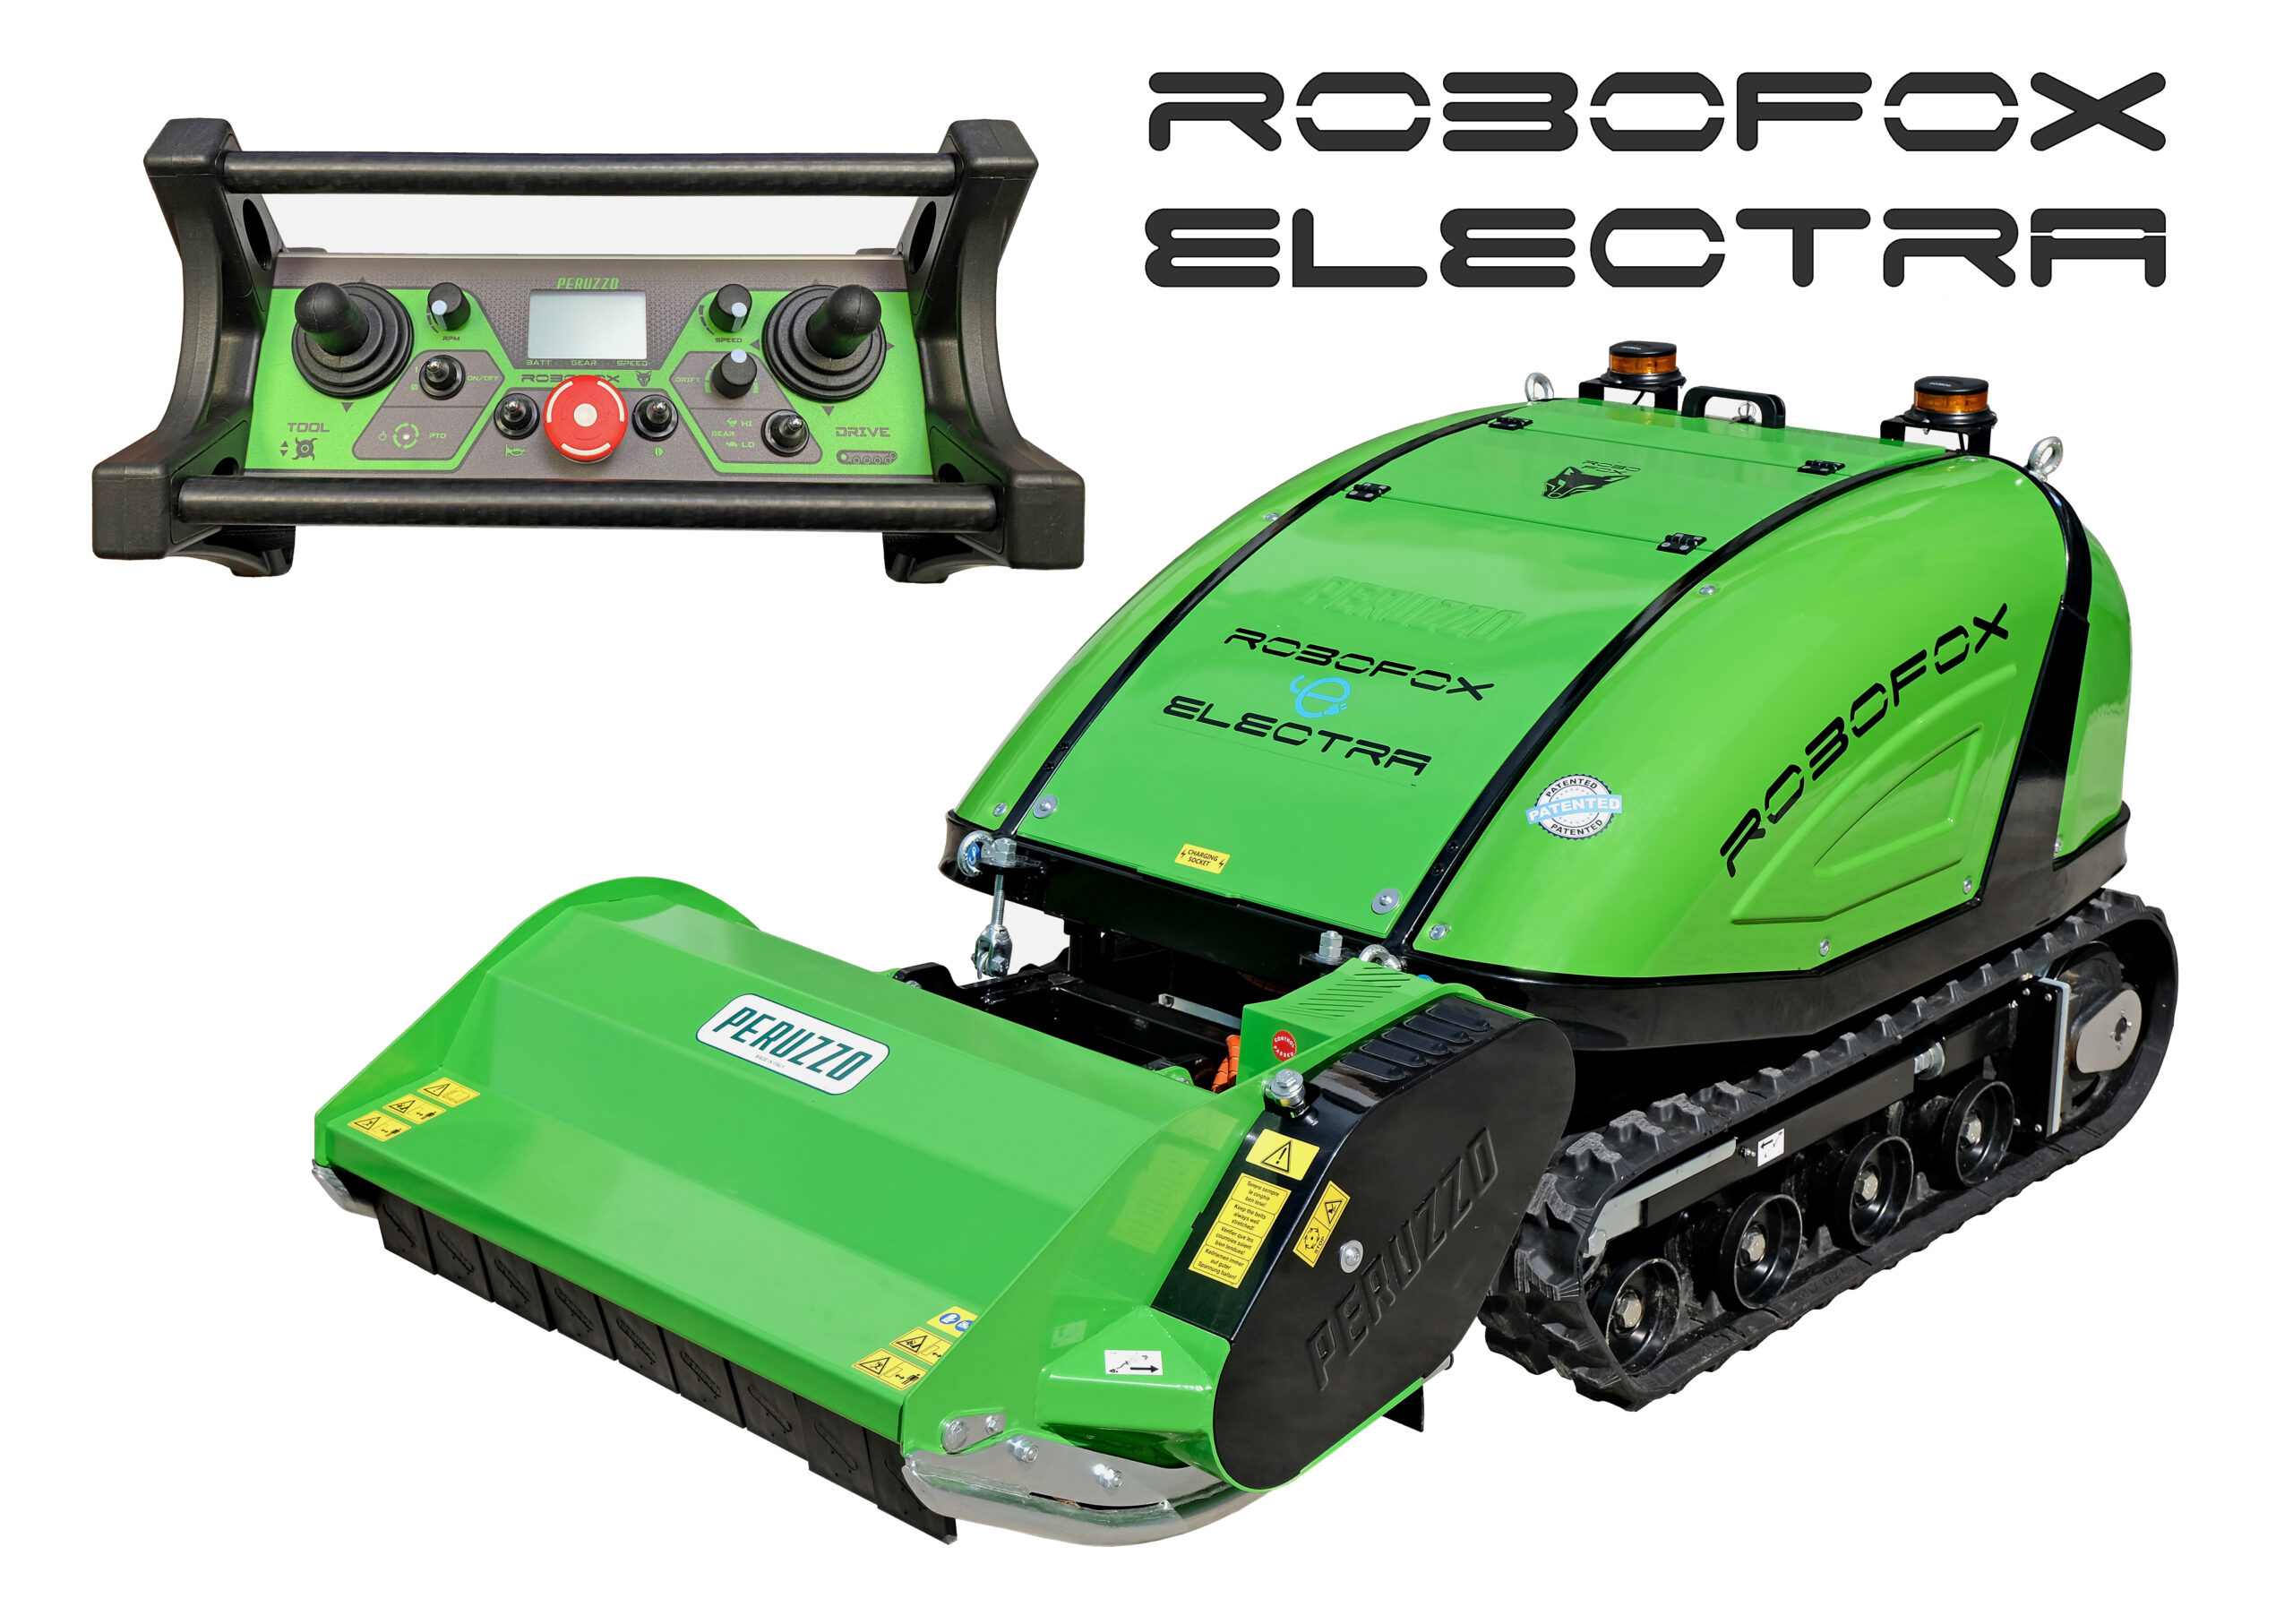 , FULL ELECTRIC self-propelled remote-controlled flail mower ROBOFOX ELECTRA, Peruzzo